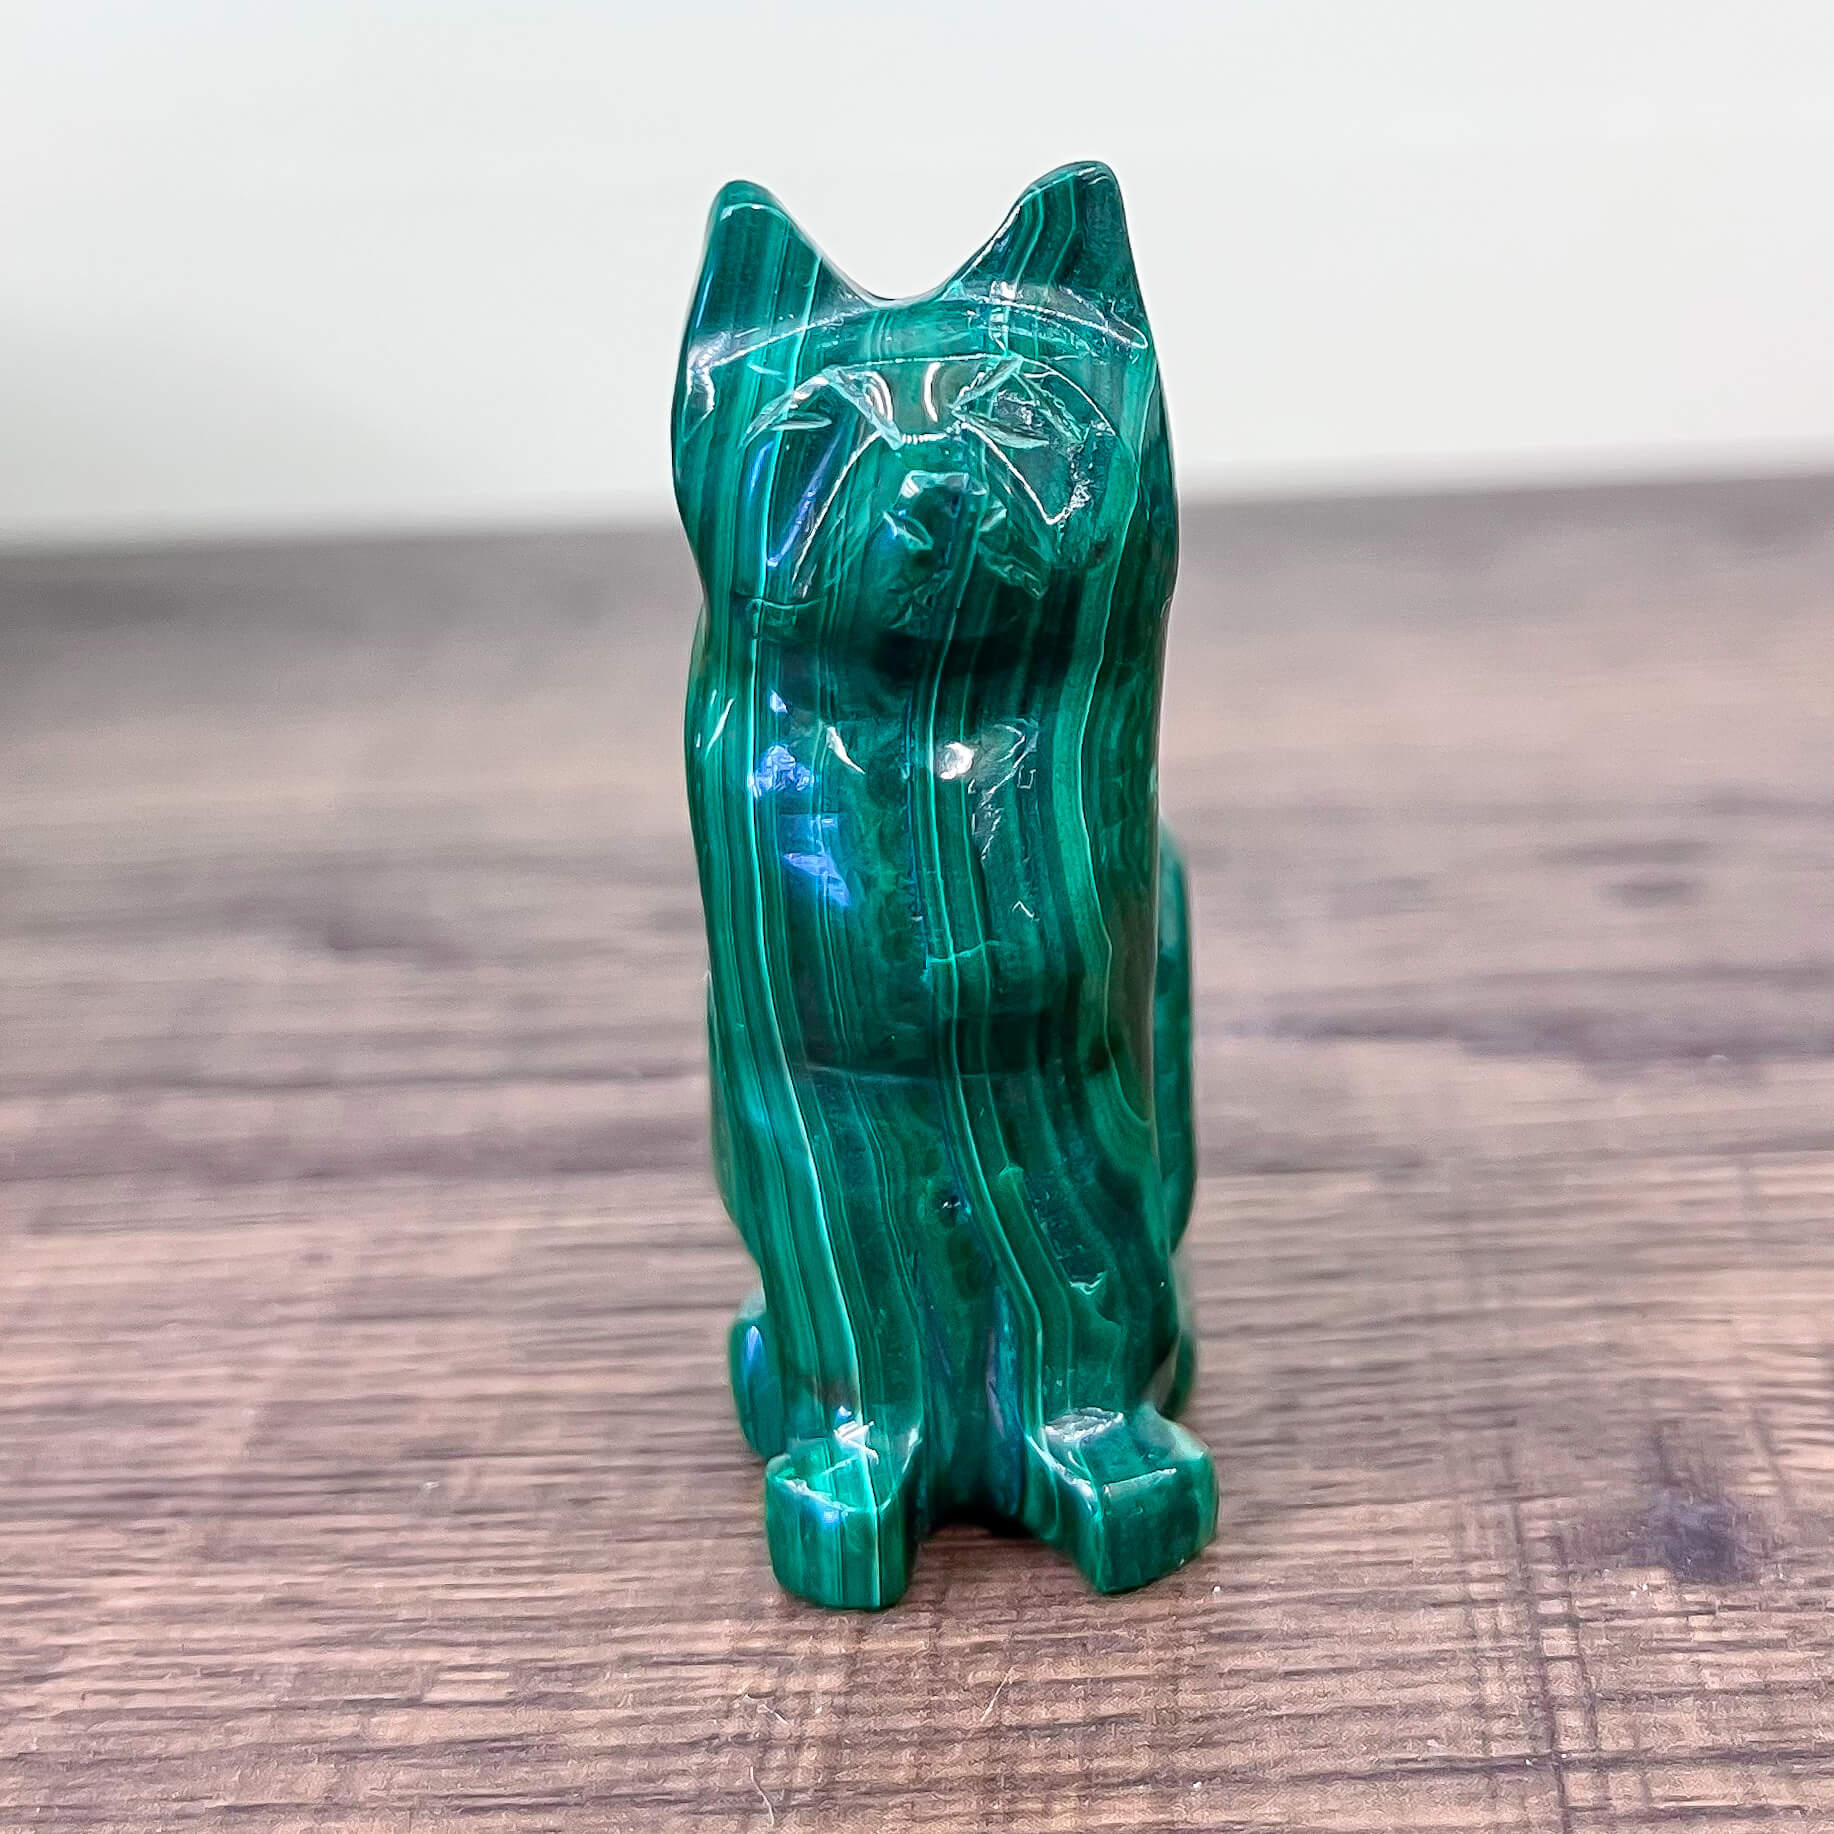 Genuine Malachite. Shop at Magic Crystals for Small Genuine Malachite Cat - Natural Malachite Cat Carving from Congo. Malachite Animal, Gifts for Her, Gifts for Him, Crystal Gemstones, Home Decor. FREE SHIPPING AVAILABLE. Hand Carved Malachite Stone Cat, Home Decor, Crystal Healing, Mineral Specimen #1.